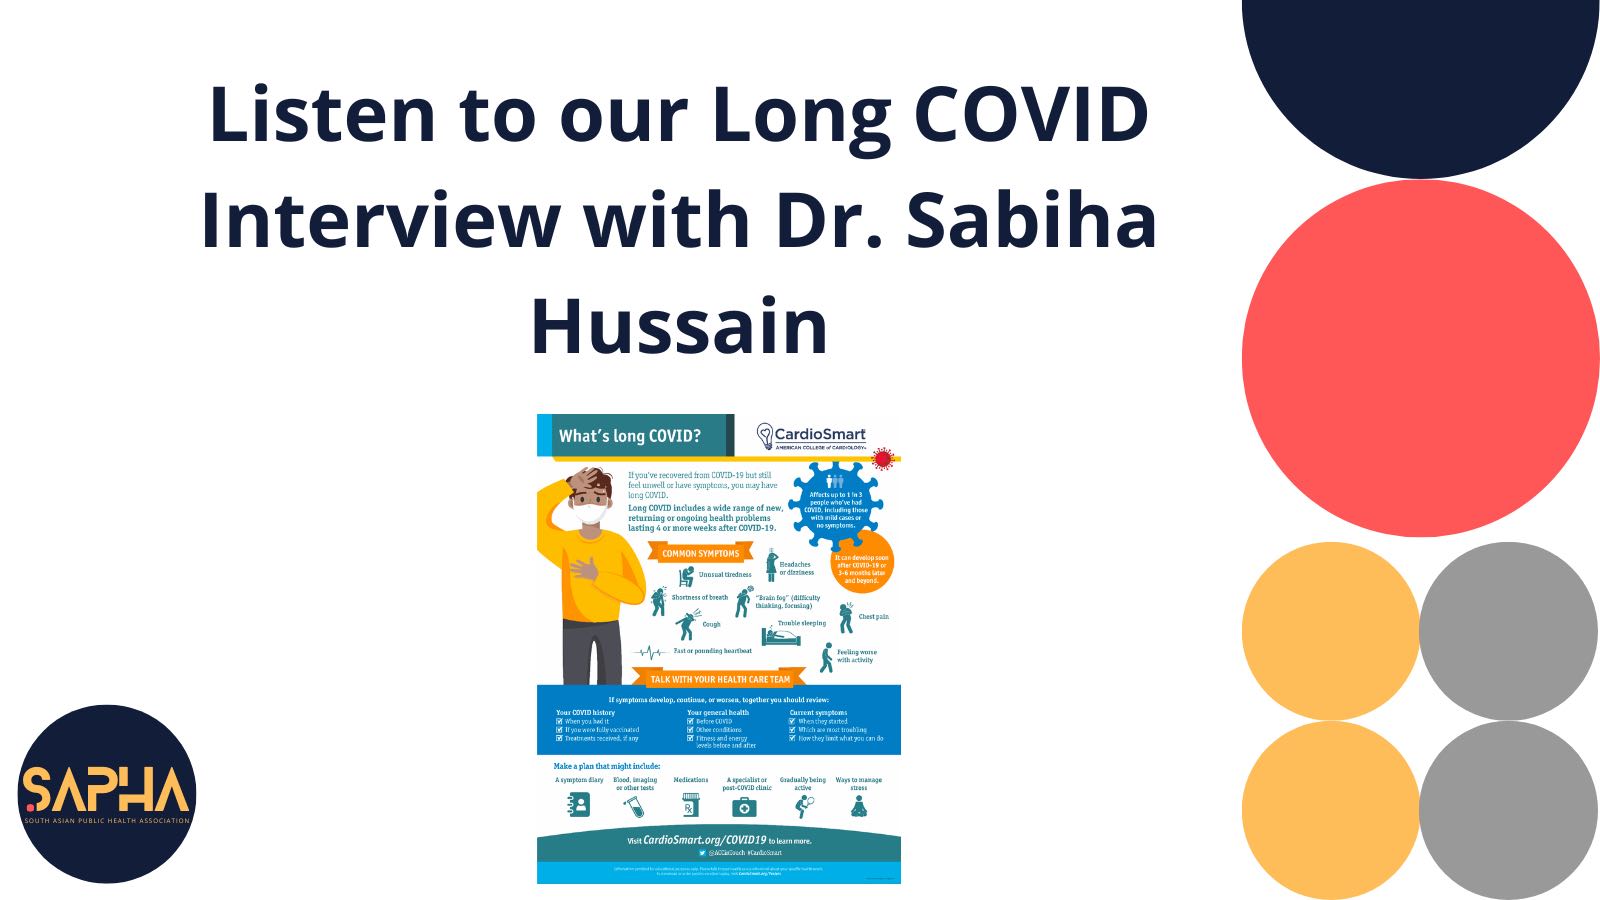 Listen to Our Long COVID Interview